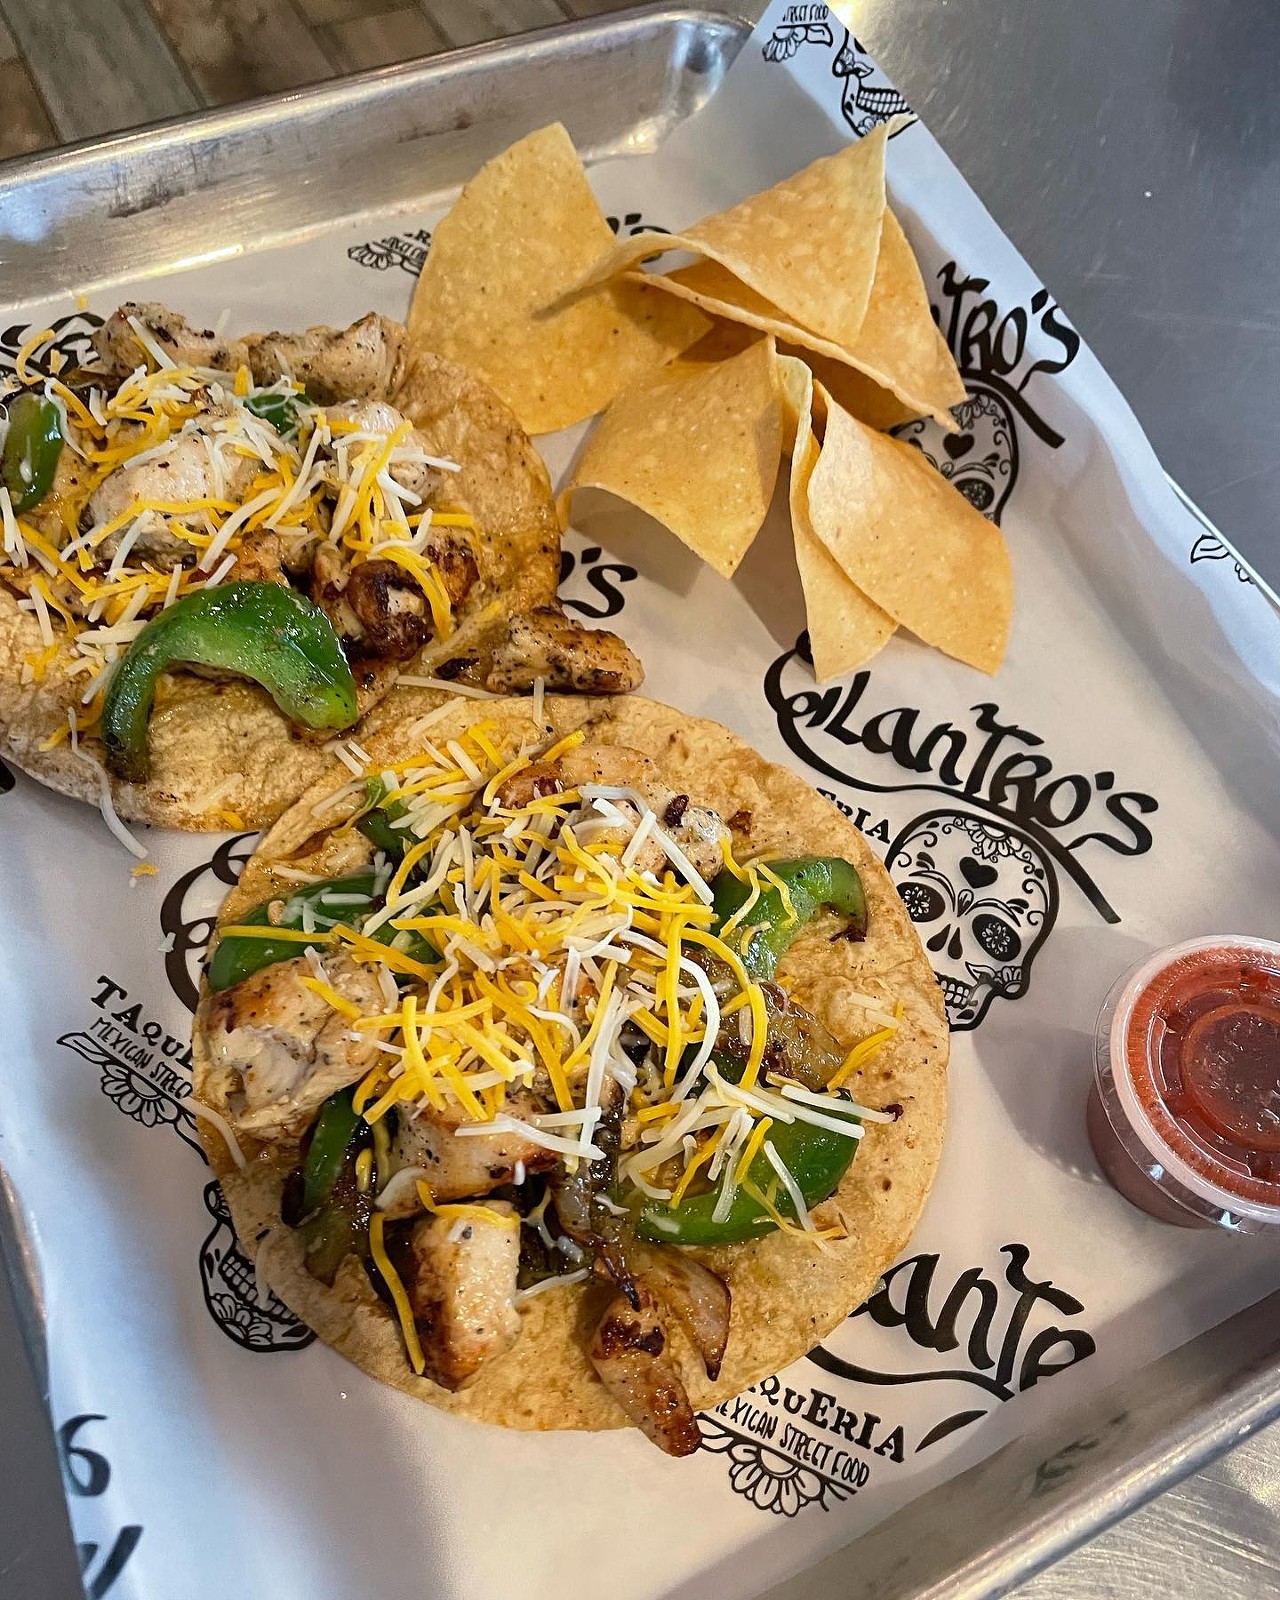 Cilantro's Taqueria1427 S. Bumby Ave.Fresh, authentic and affordable. What more can you ask for? Cilantro’s antojitos, or “little cravings,” are deliciously inspired by Mexico City’s street food vendors and crafted with fresh ingredients.